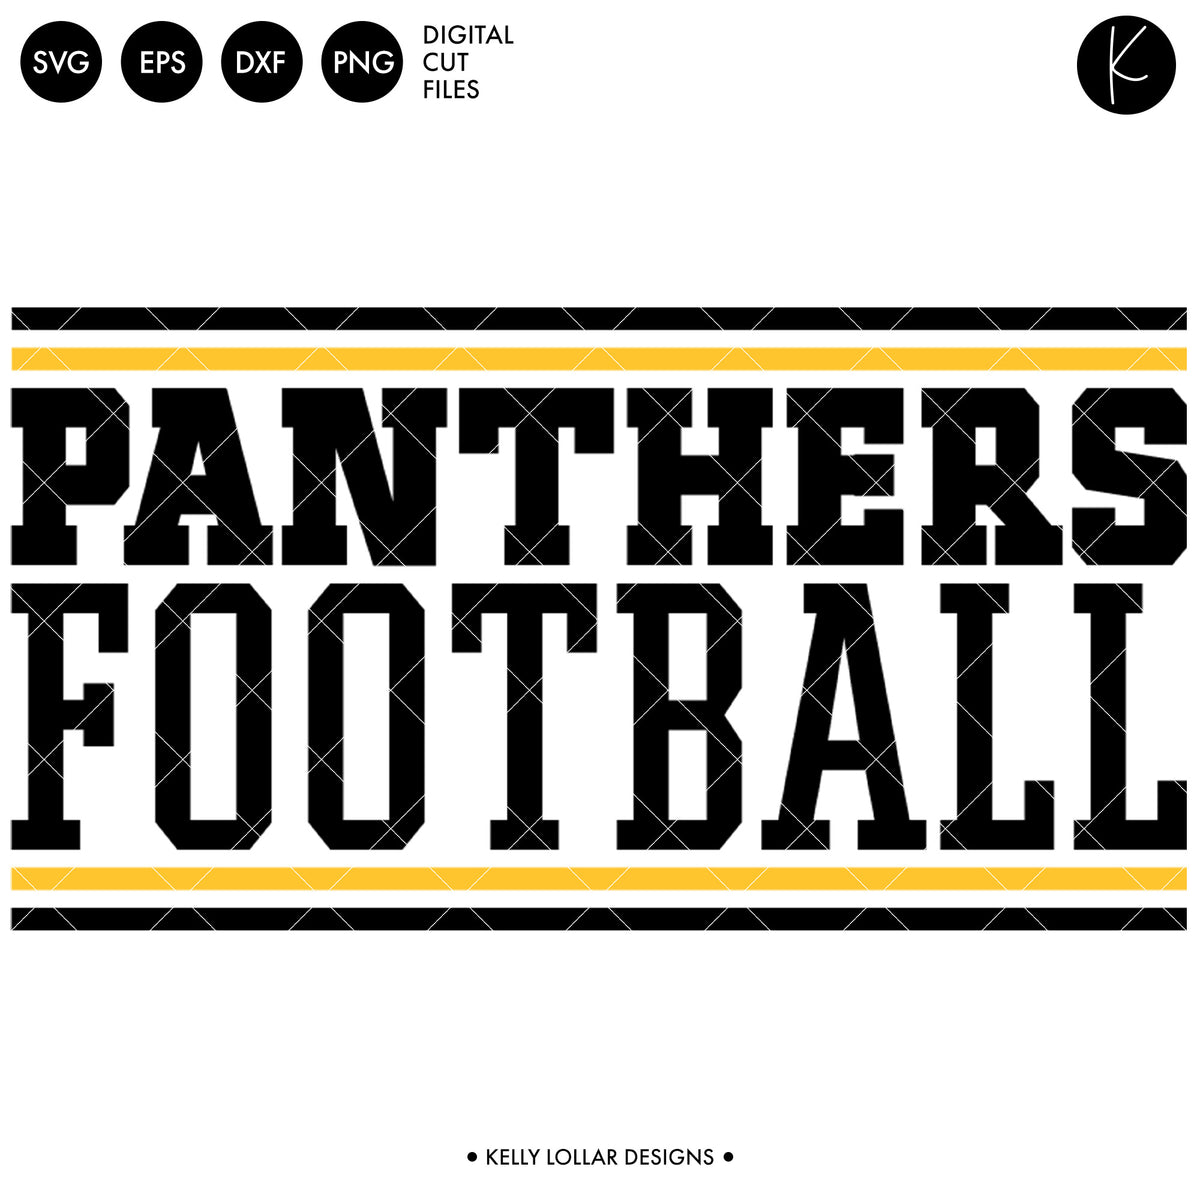 Panthers Soccer and Football Bundle | SVG DXF EPS PNG Cut Files